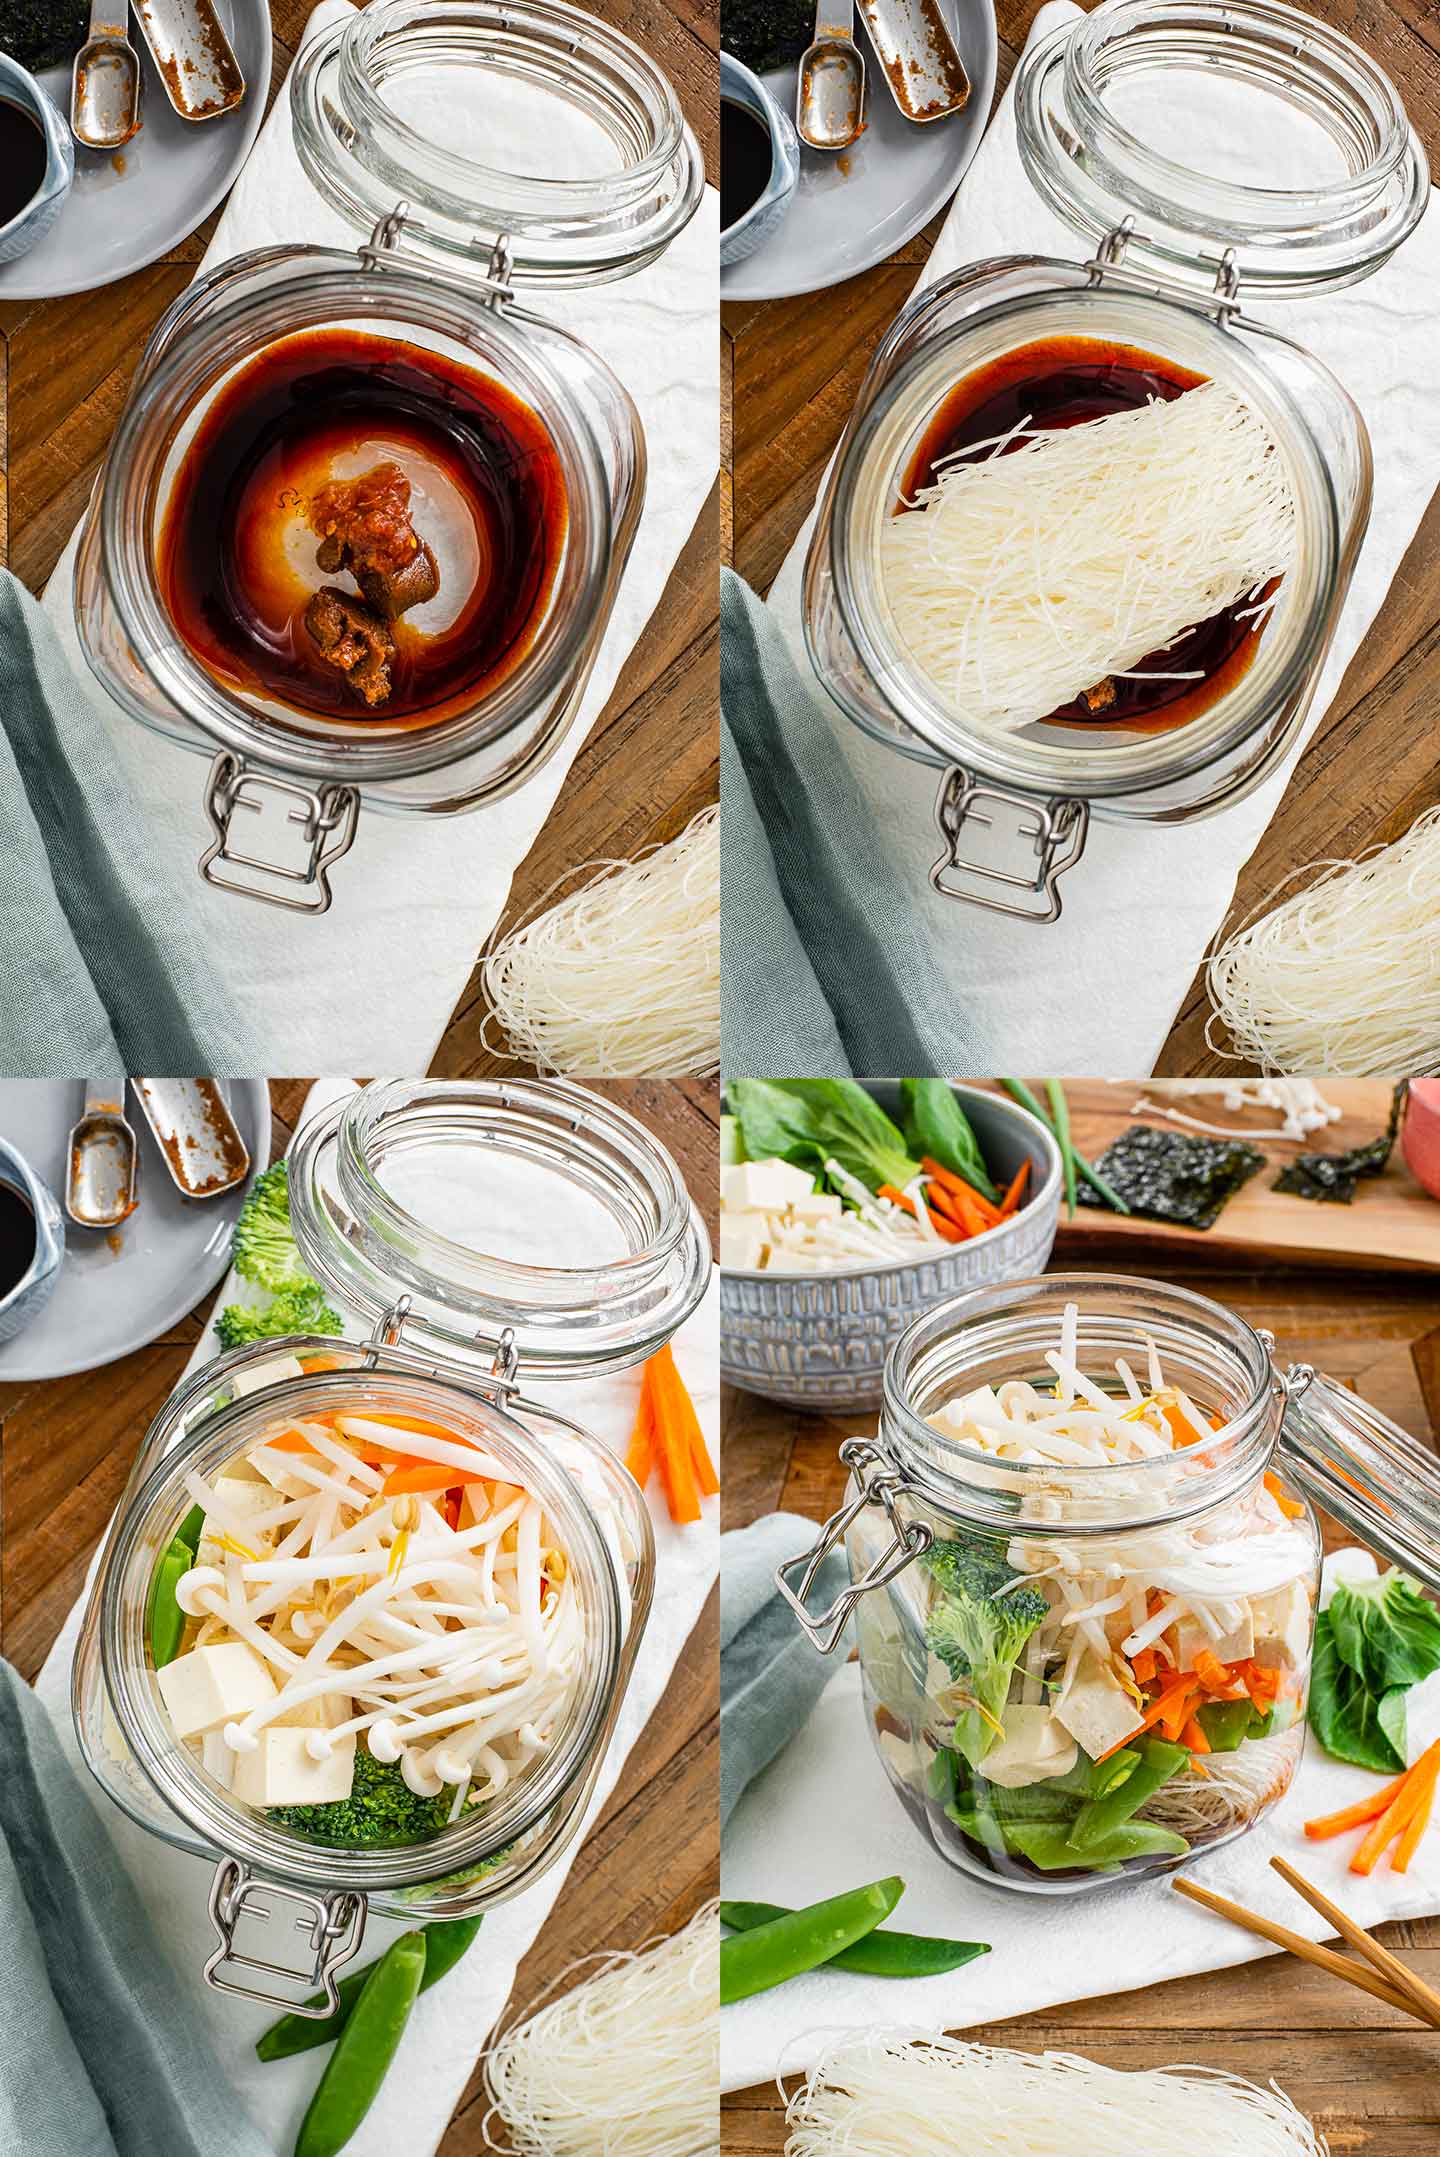 Grid of four process photos. Broth ingredients are added to a large glass jar. Dry rice noodles are added. Vegetables and tofu are piled on top. Finally hot water is added to the jar creating the soup.